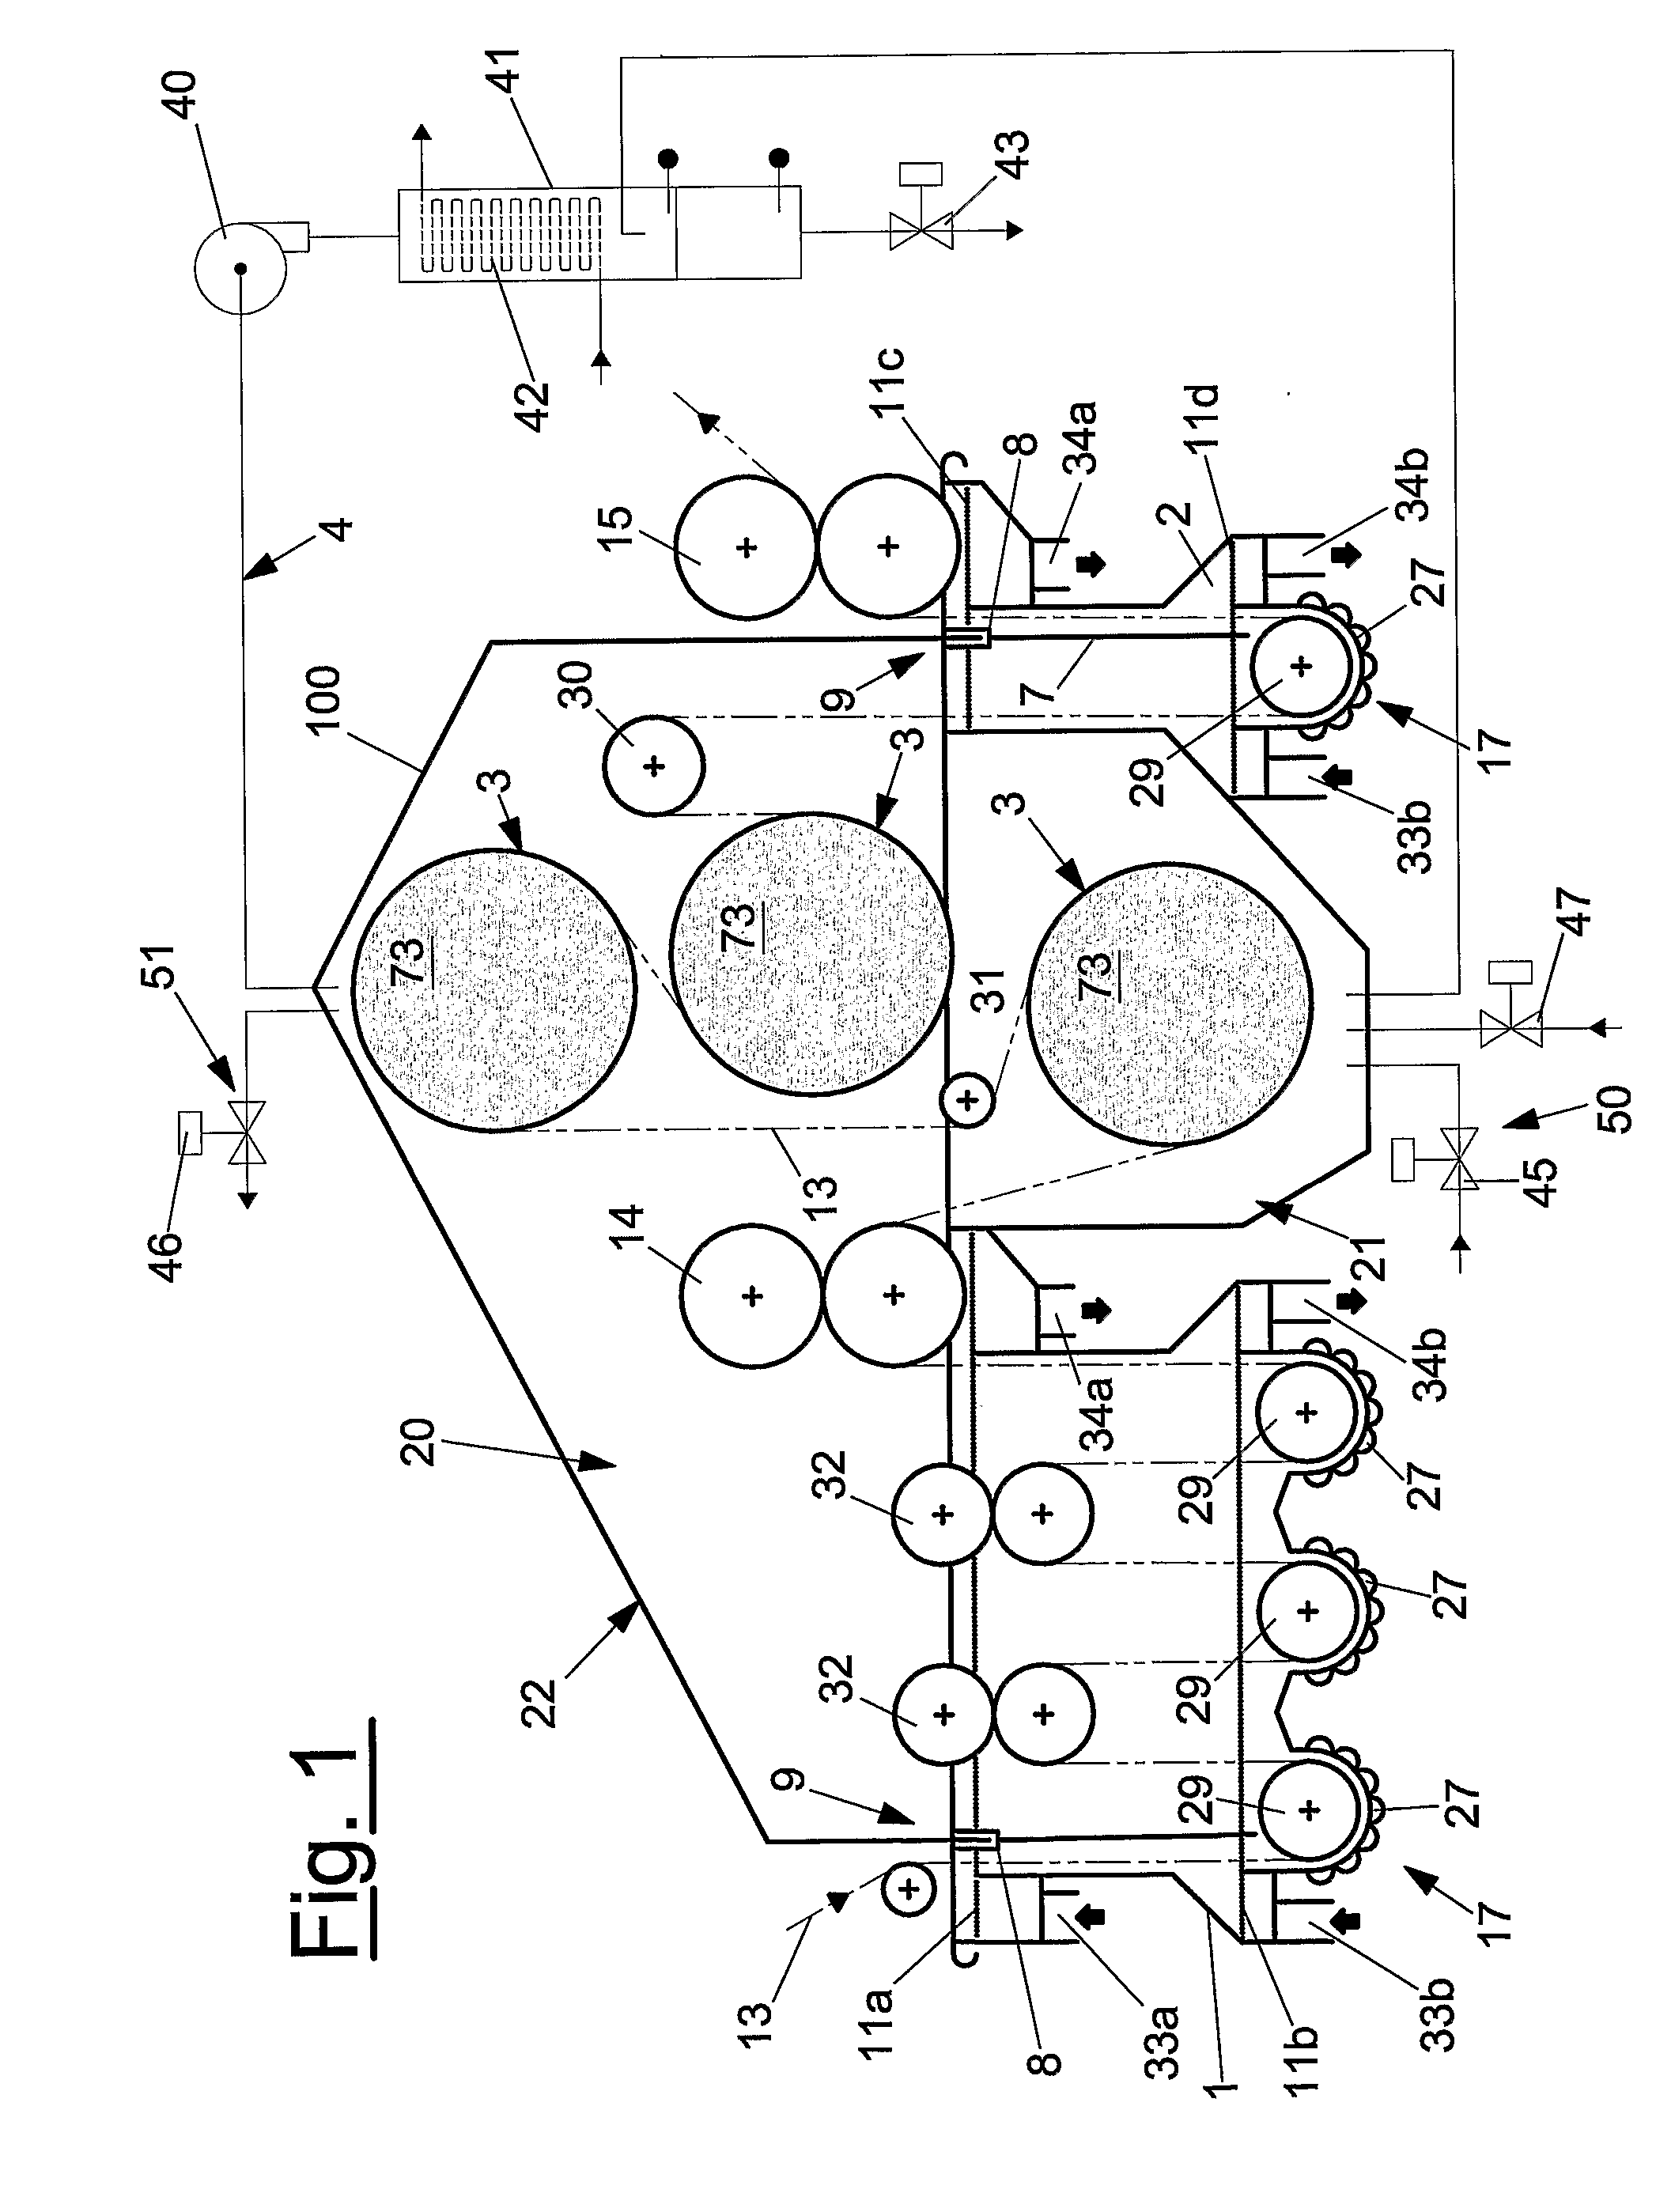 Dyeing Device And Process Using Indigo And Other Colorants